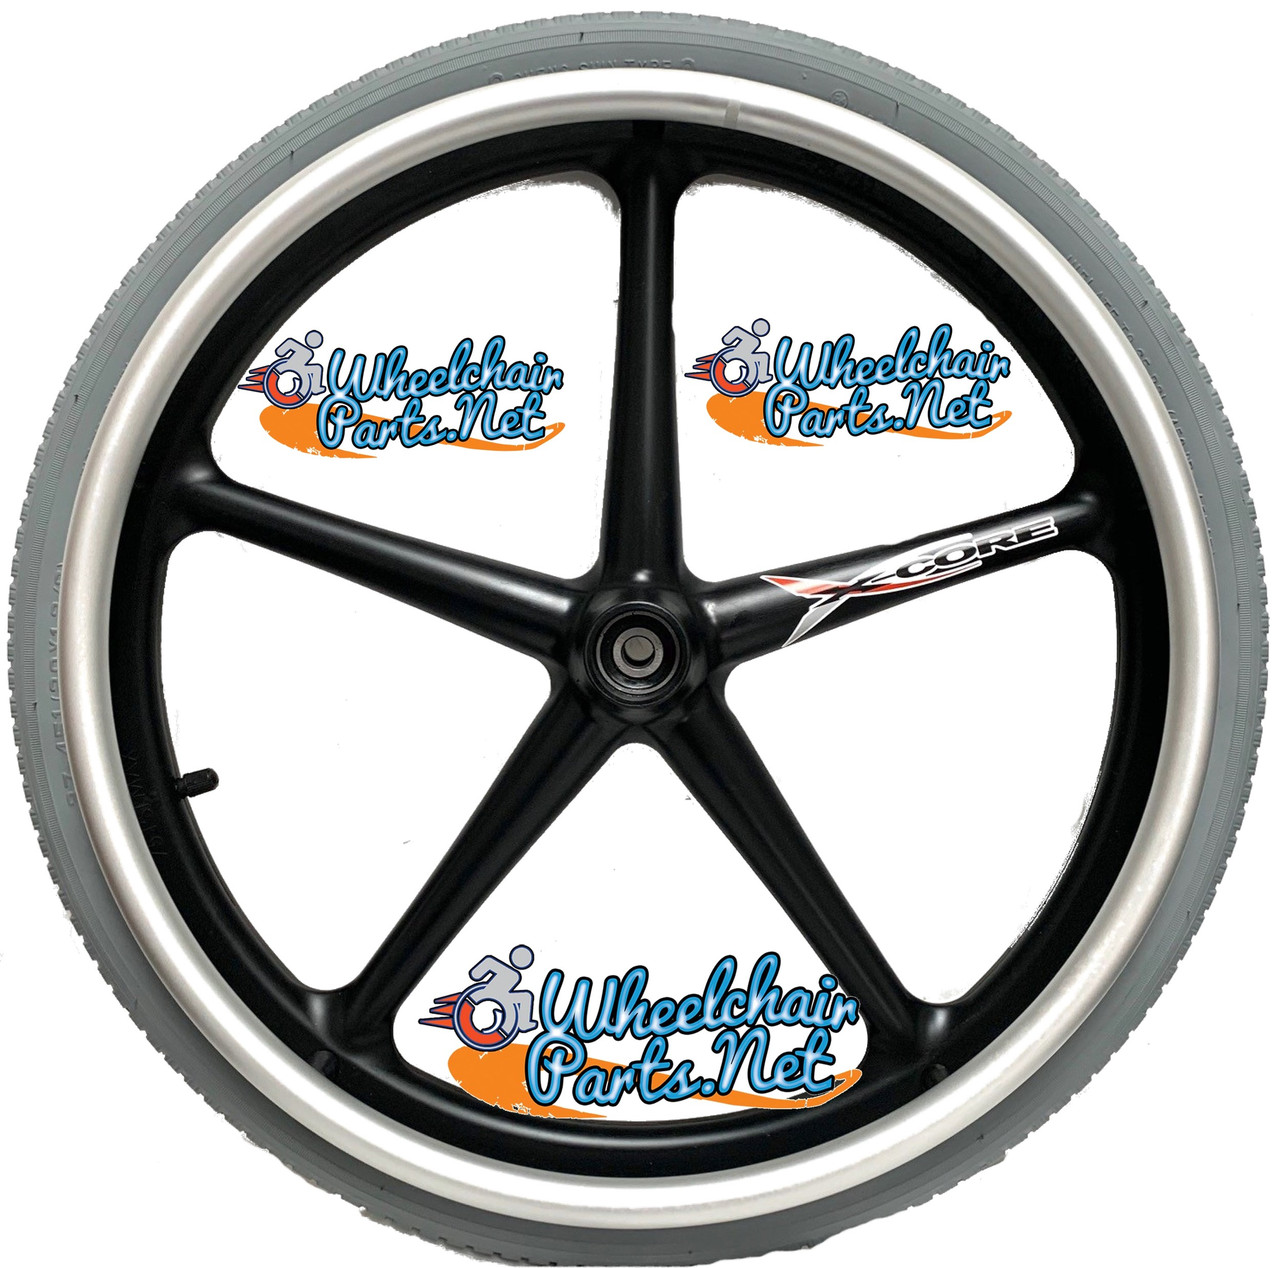 22" x 1 3/8"  X-CORE 5 spoke Wheel with PNEUMATIC TIRE & TUBE. Sold as Pair